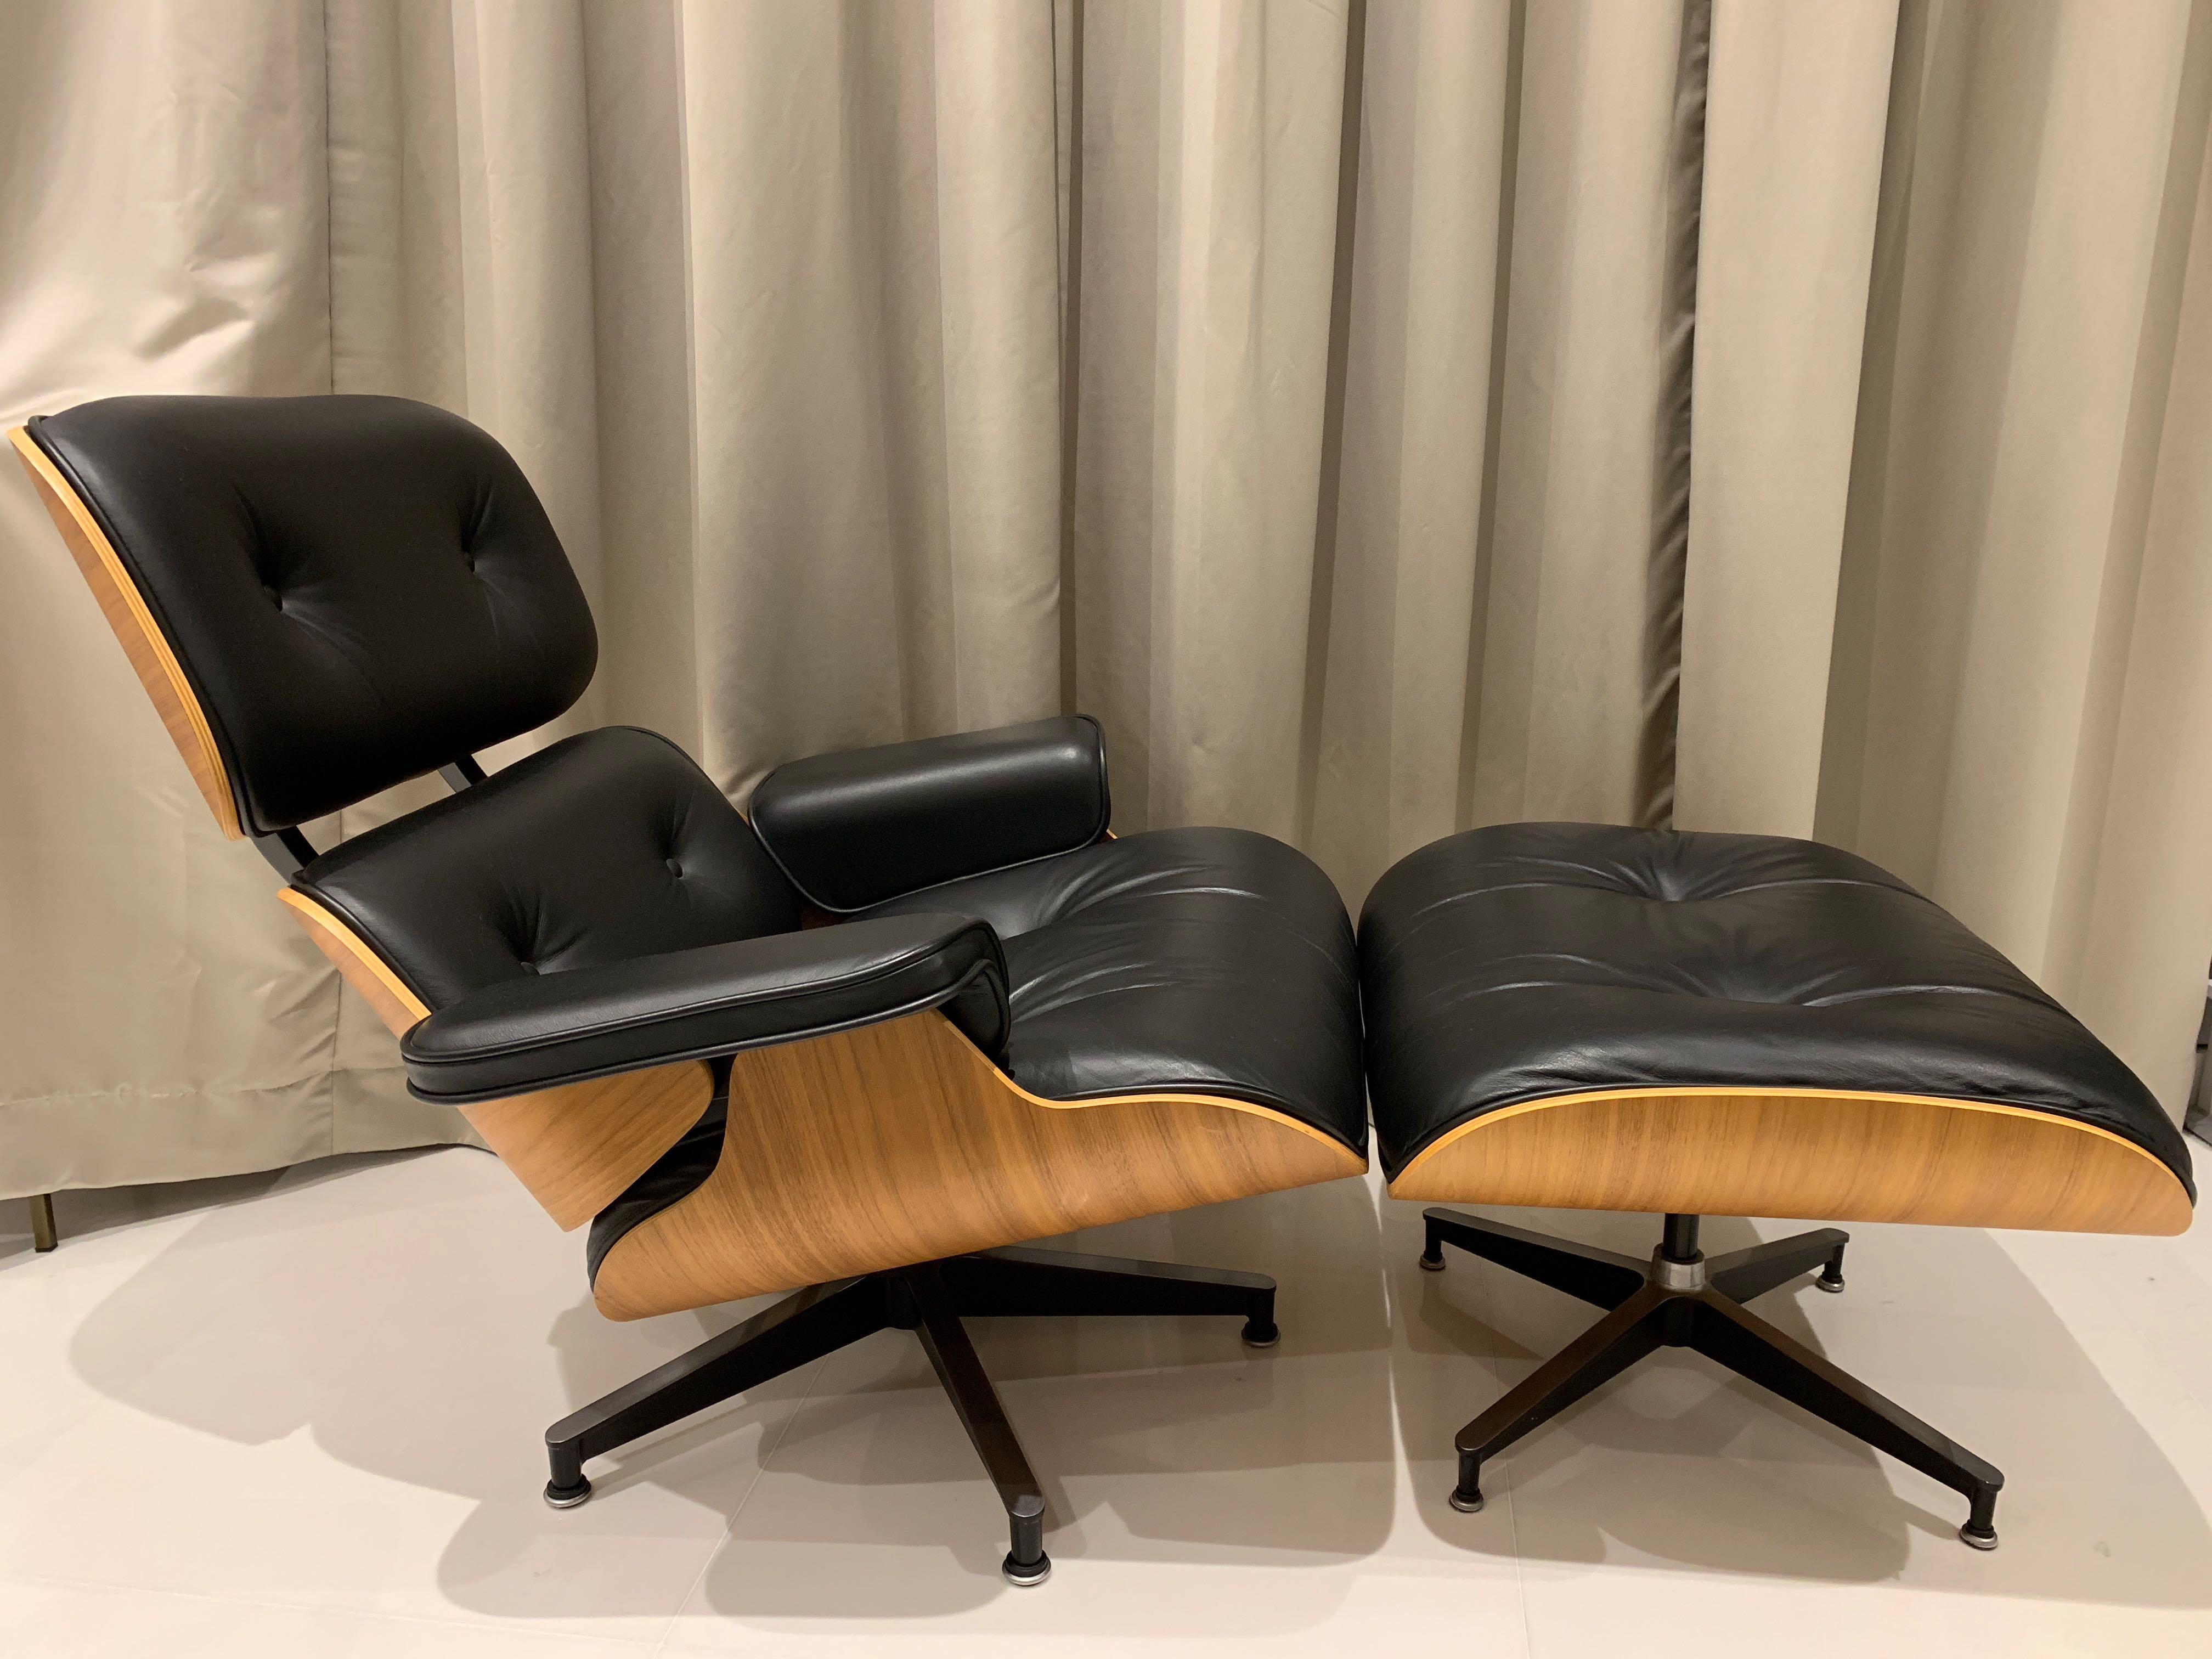 Eames Lounge Chair And Ottoman Tall, Eames Lounge Chair And Ottoman Used